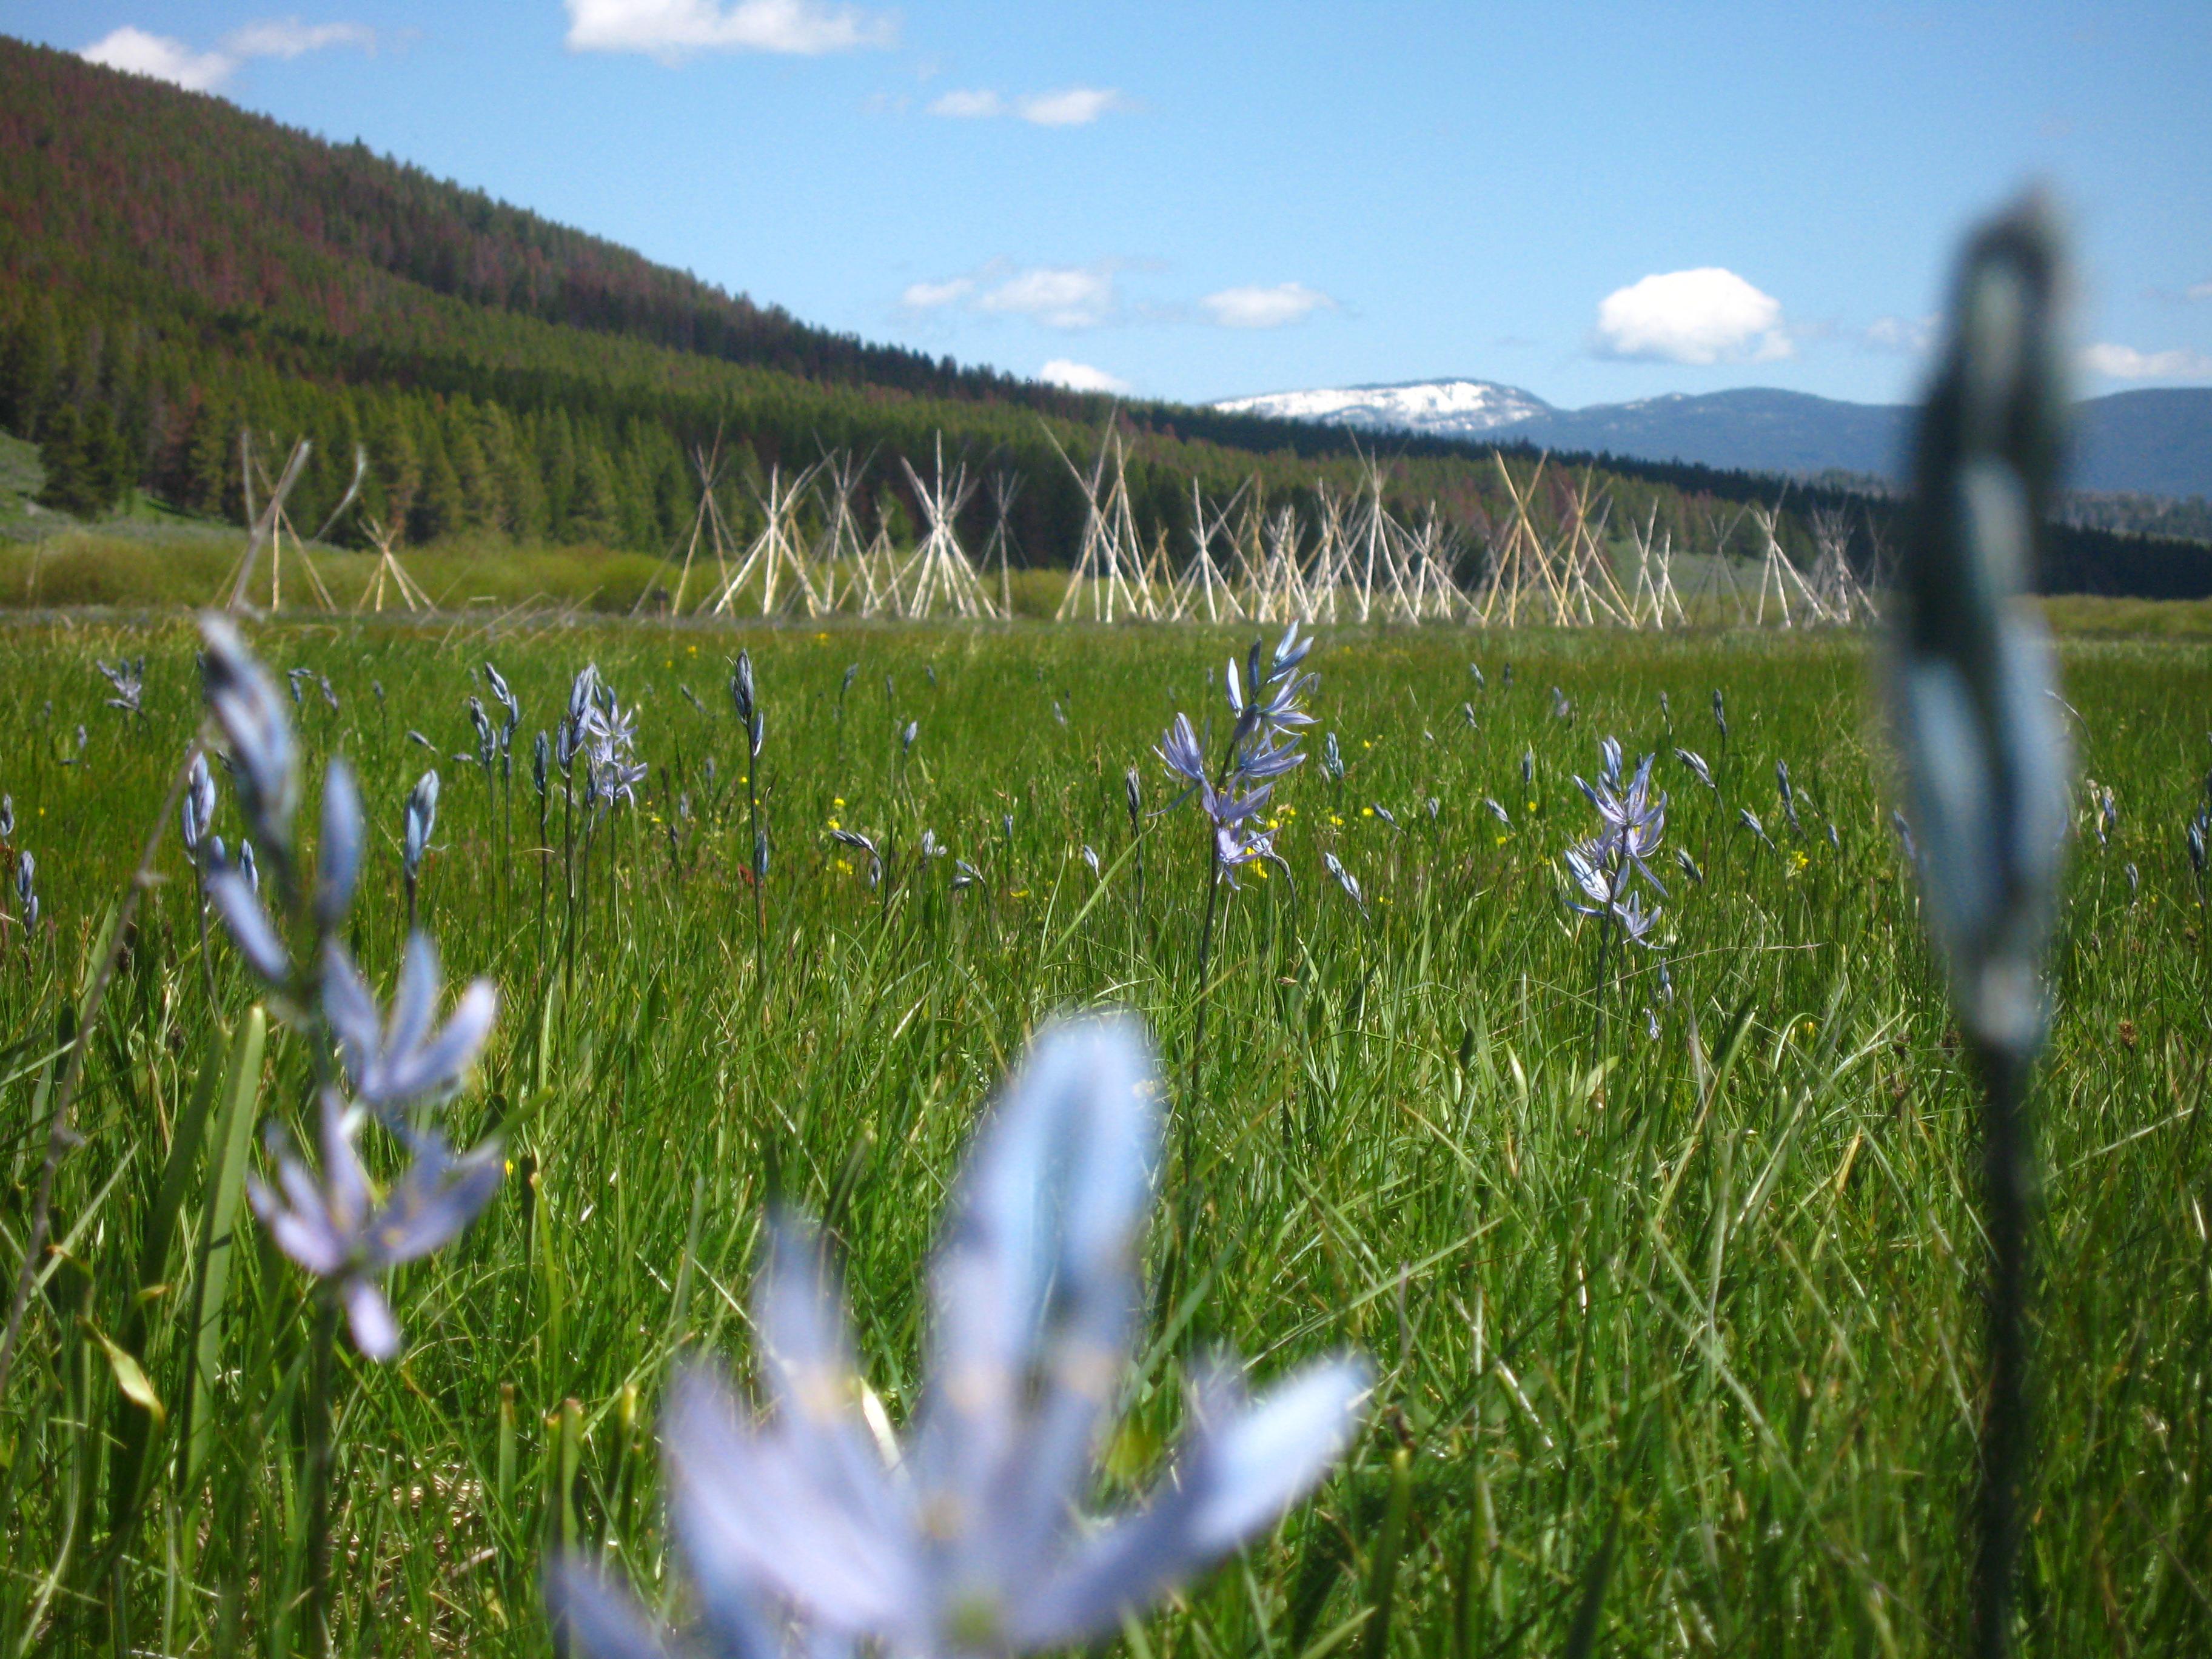 Blue camas flowers dot a green field with tepee poles in the background.